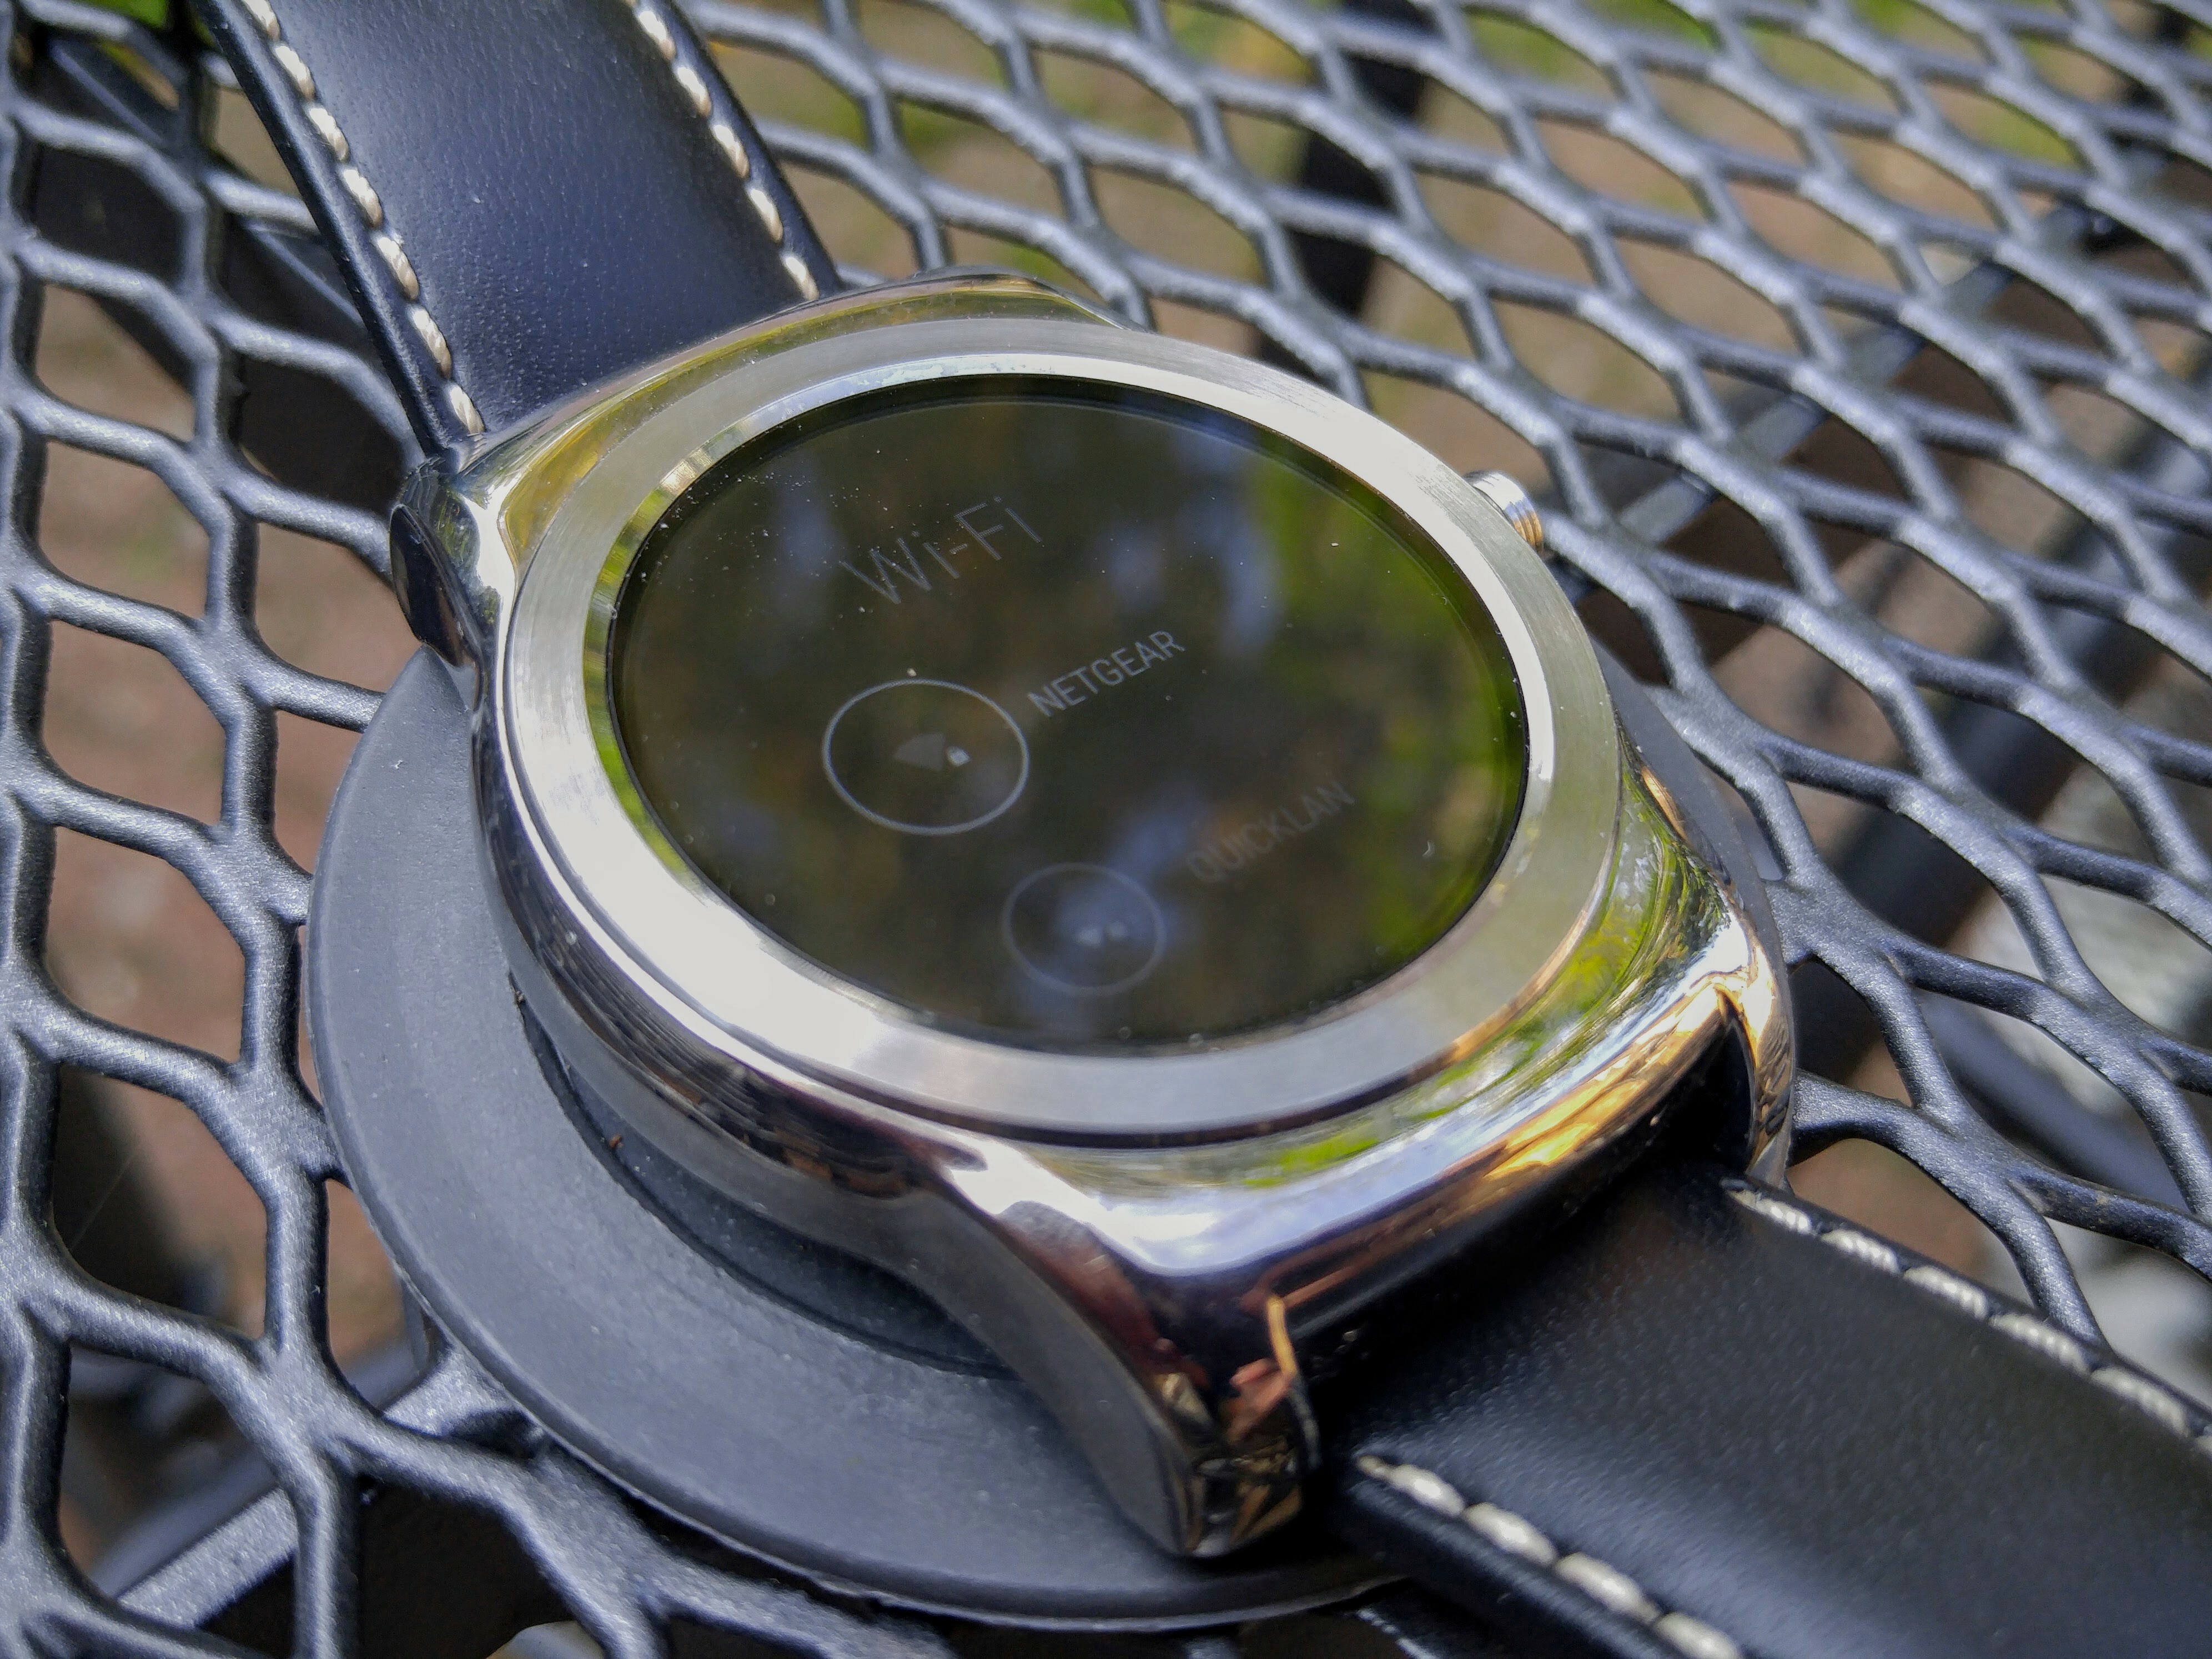 Android Wear, evolved